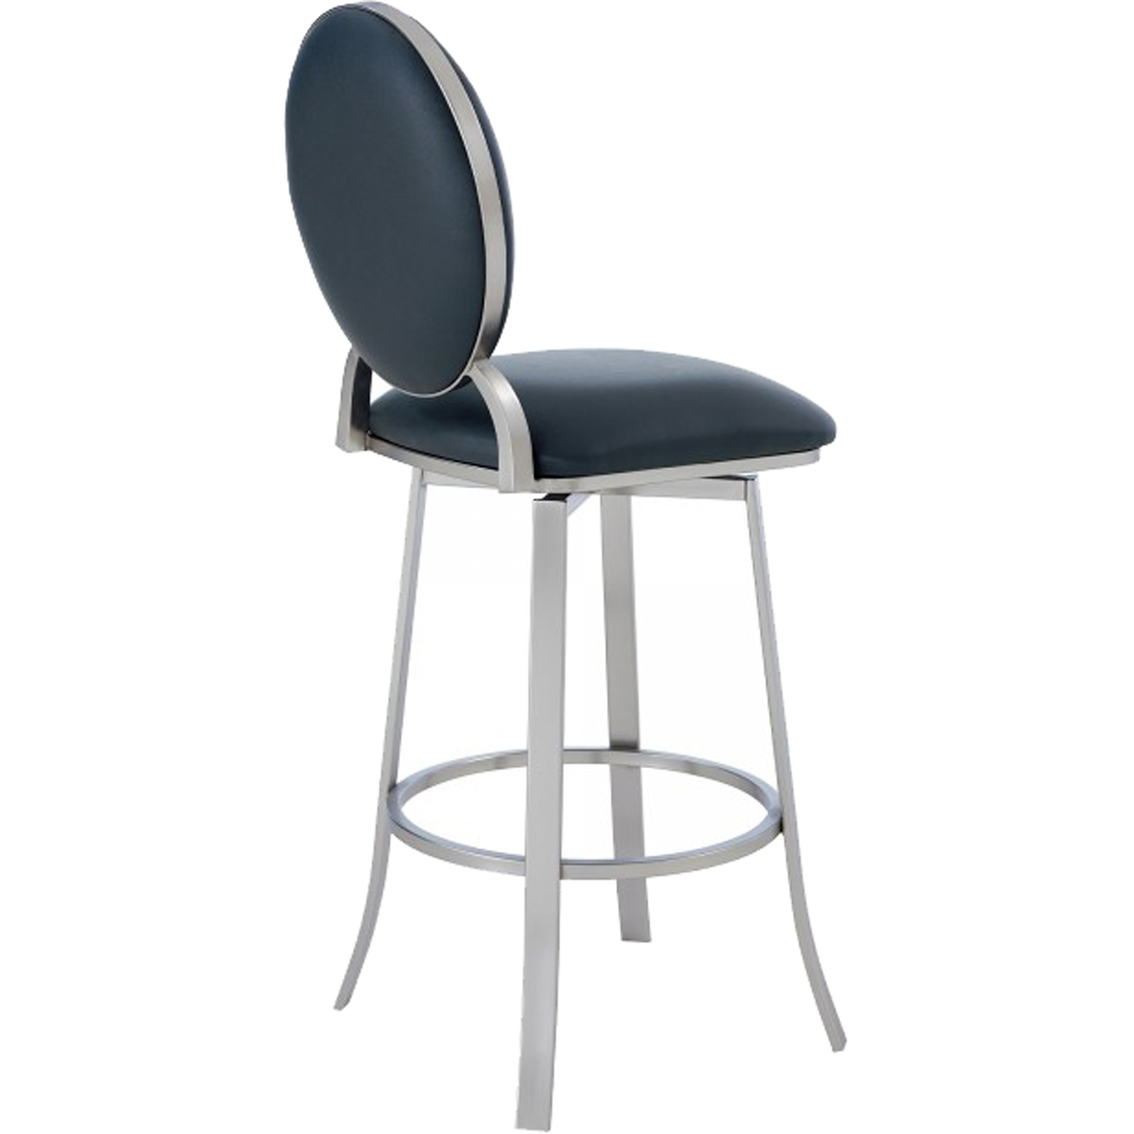 Armen Living Pia Barstool in Brushed Stainless Steel Finish and Grey Faux Leather - Image 3 of 7